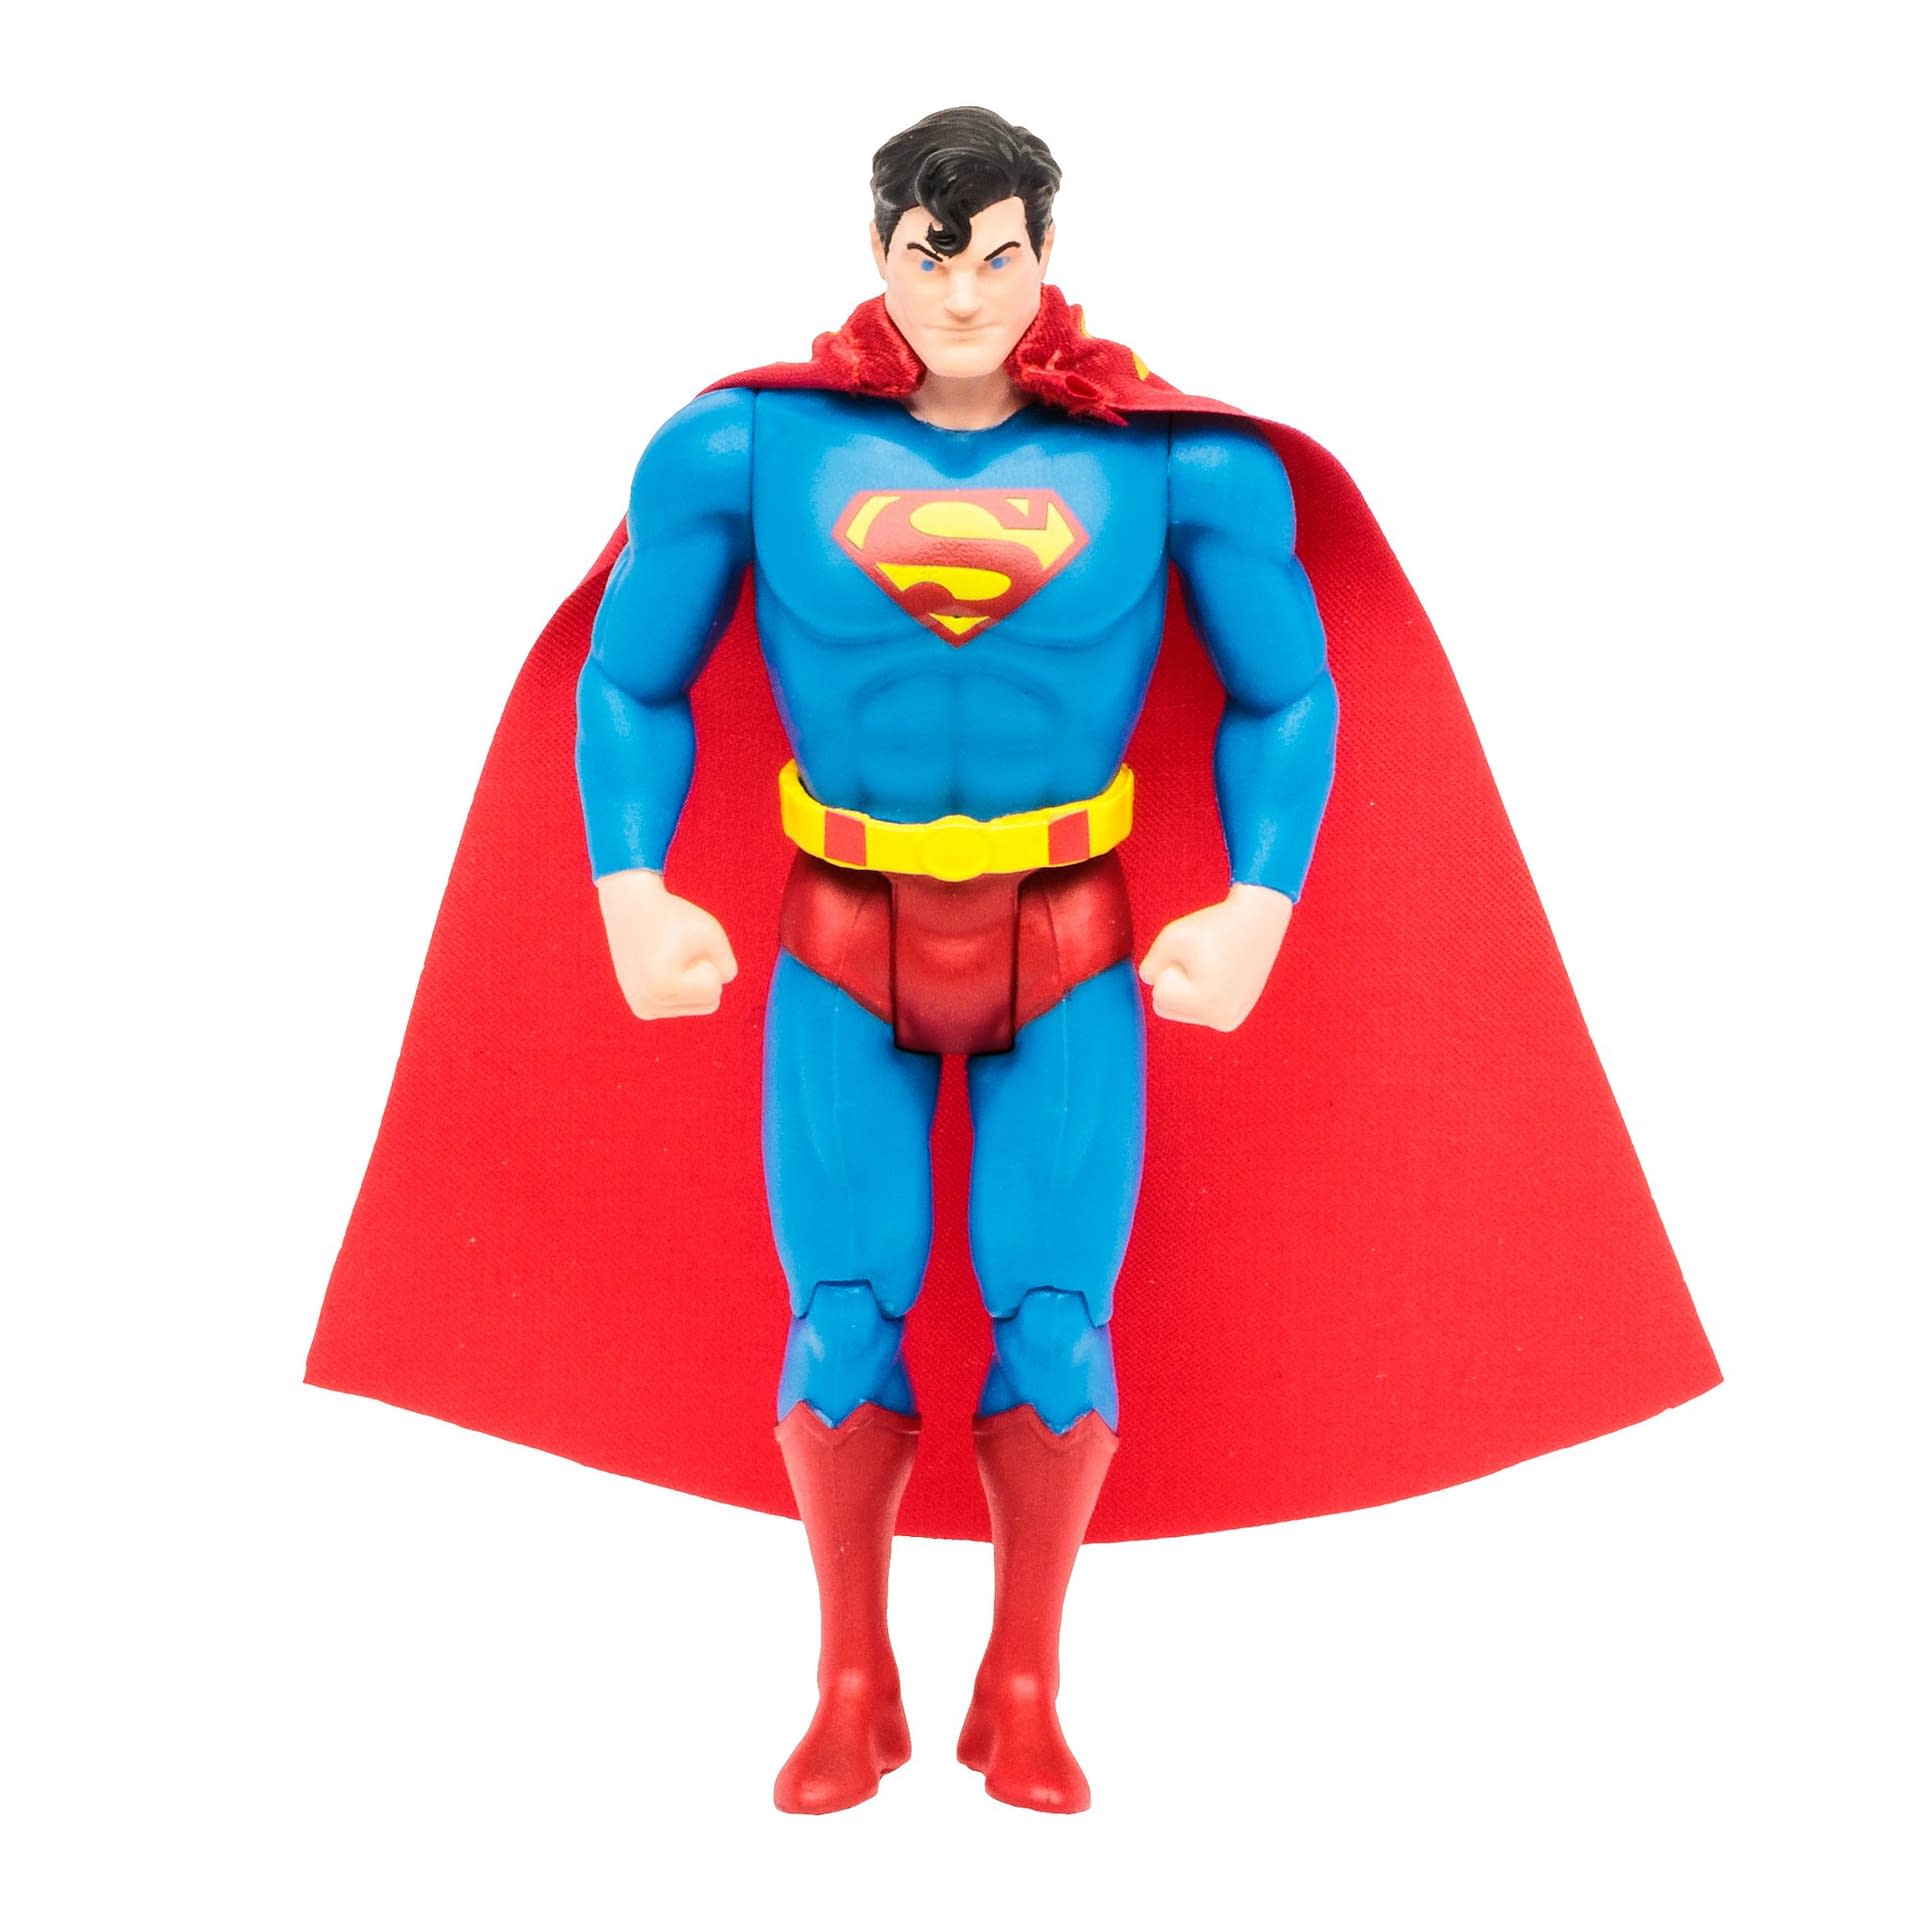 McFarlane Toys Officially Reveals the Return of DC Comics Super Powers